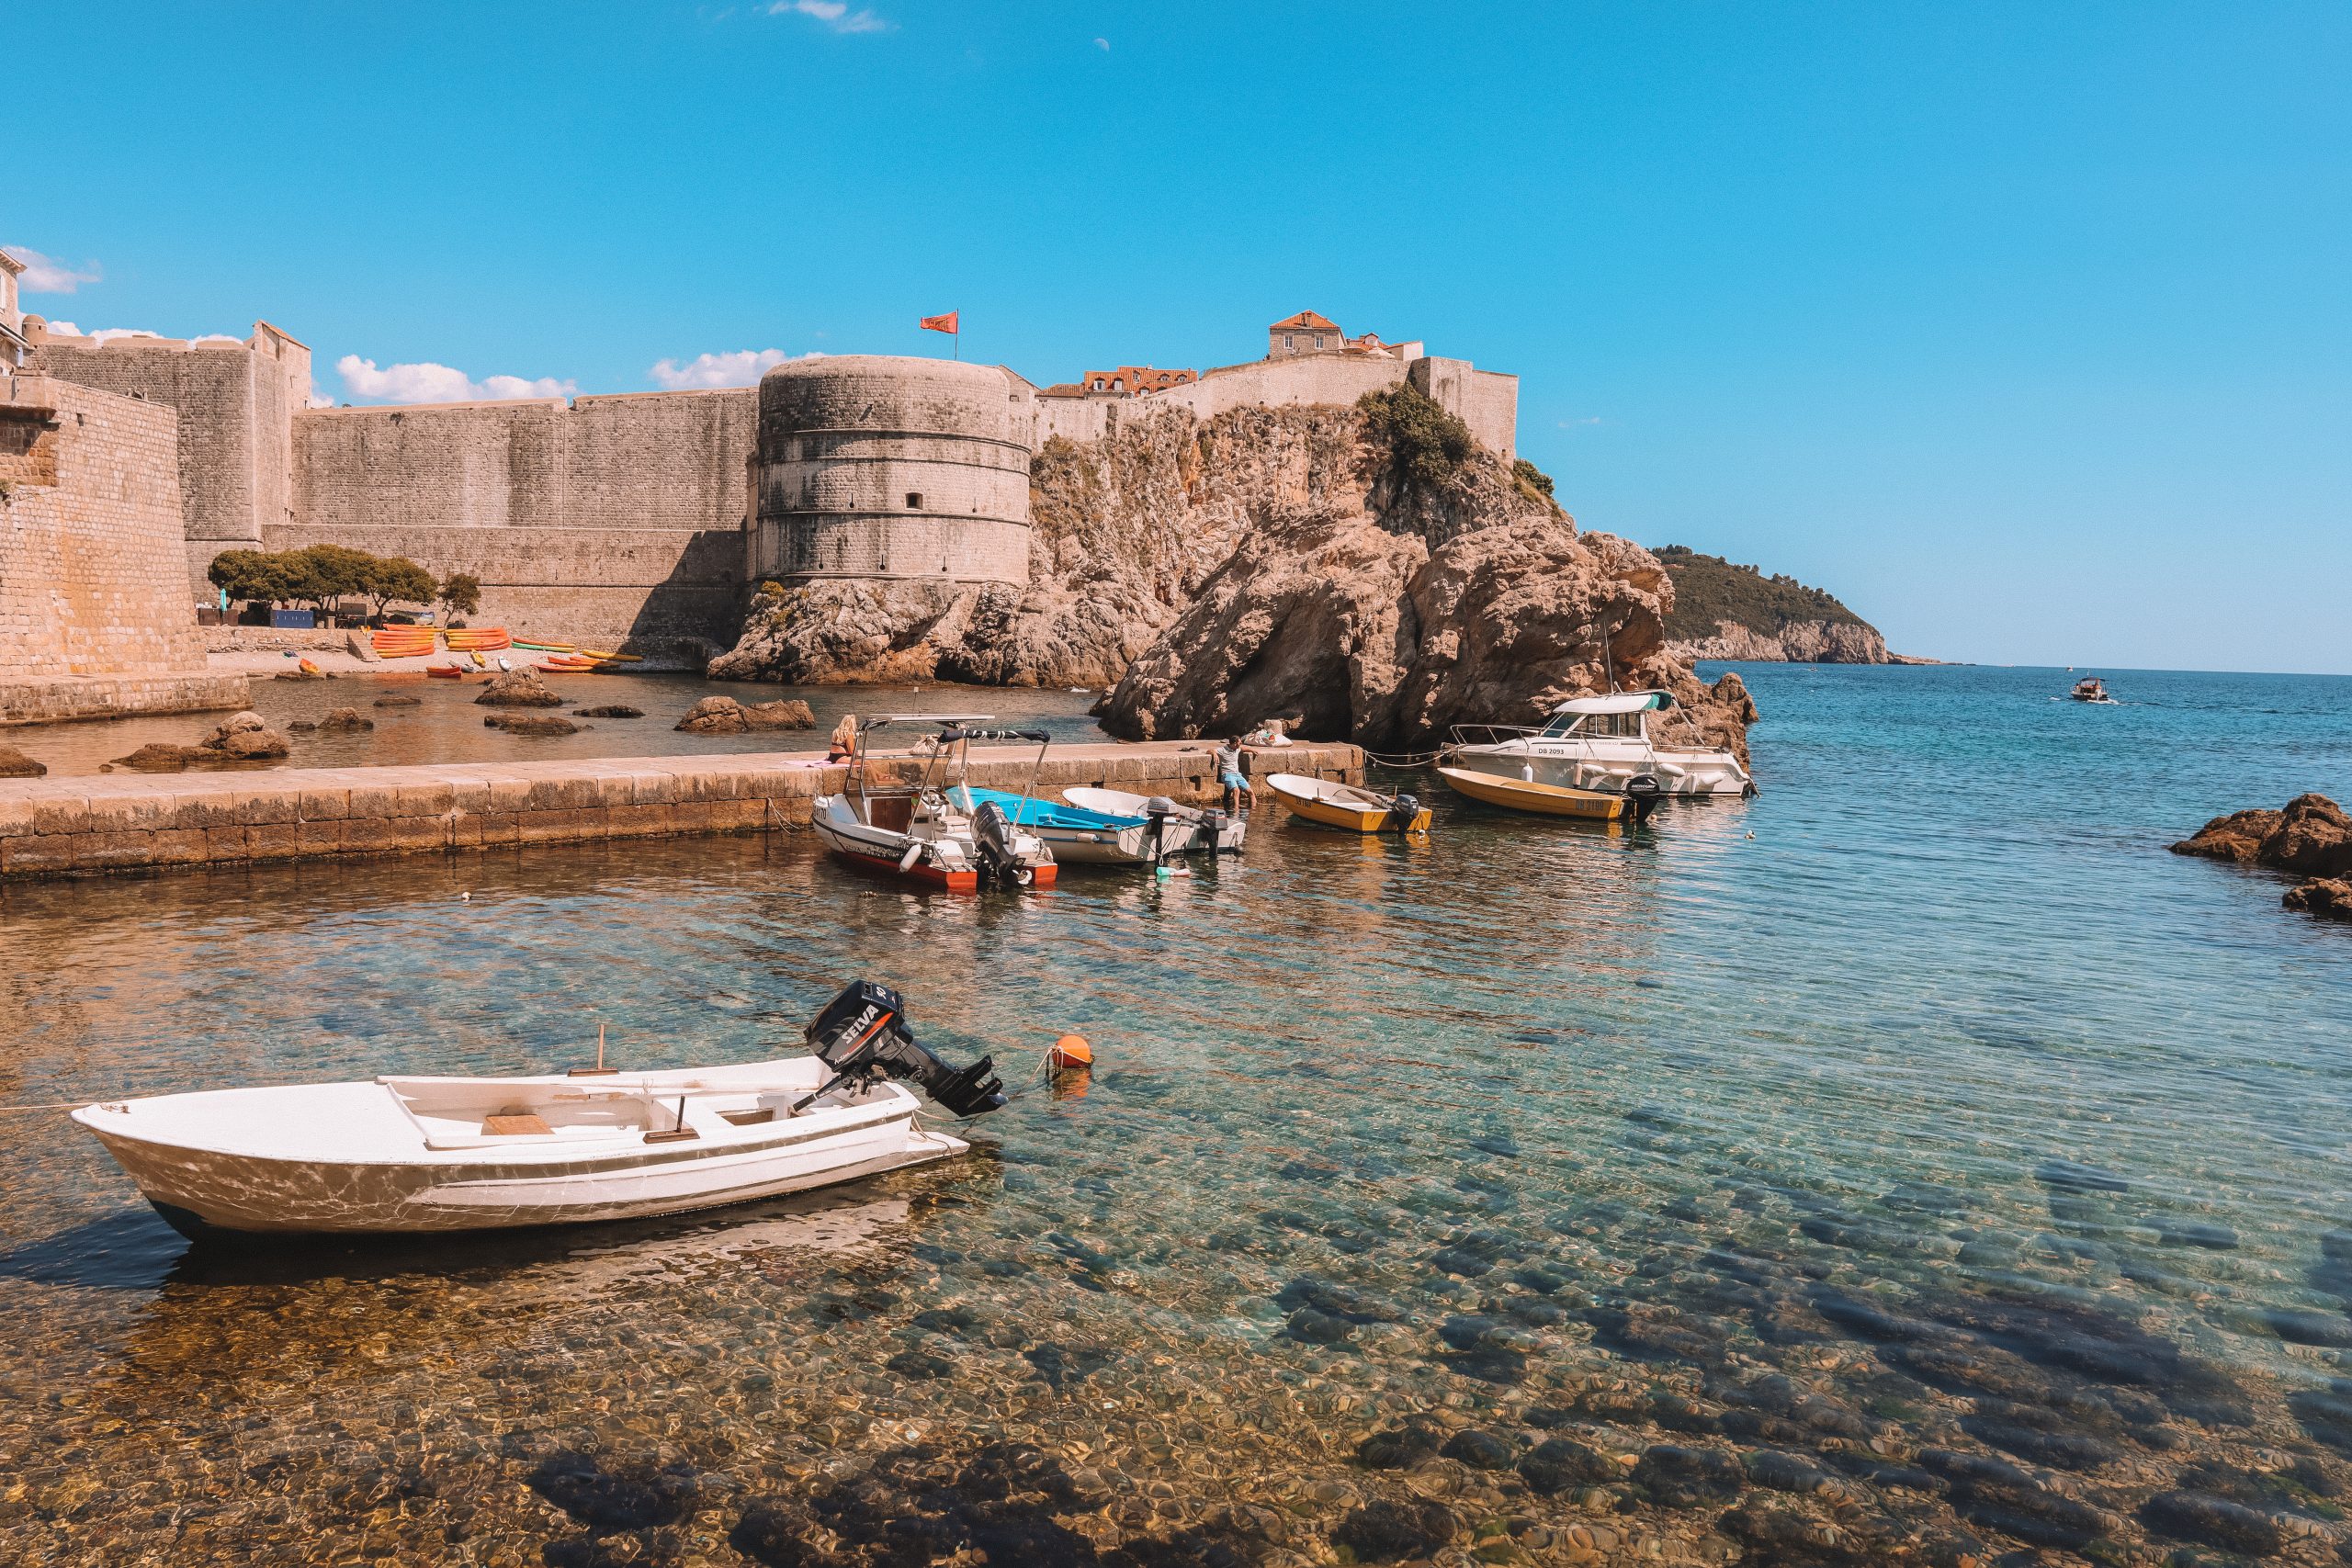 Boats in the ocean and a castle in the background. What to do in Dubrovnik.